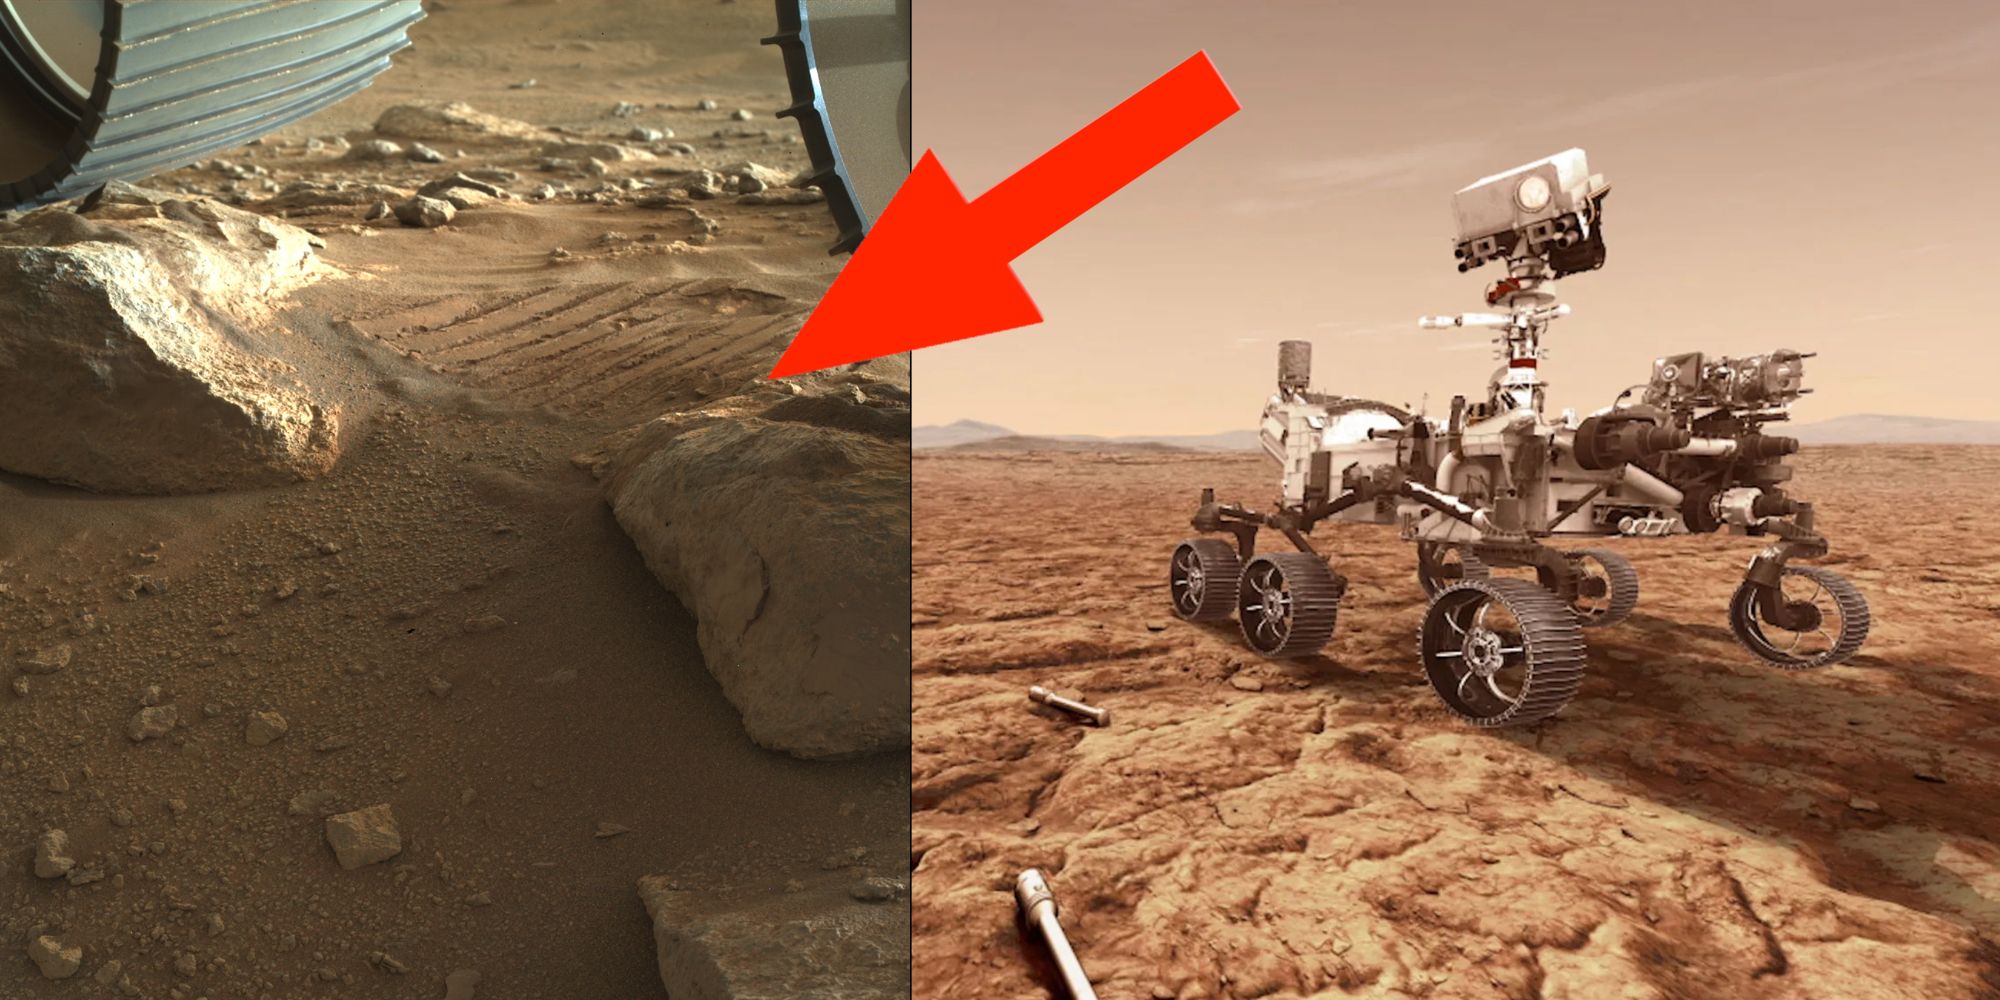 Perseverance rover and a photo of the Mars ground below its wheels